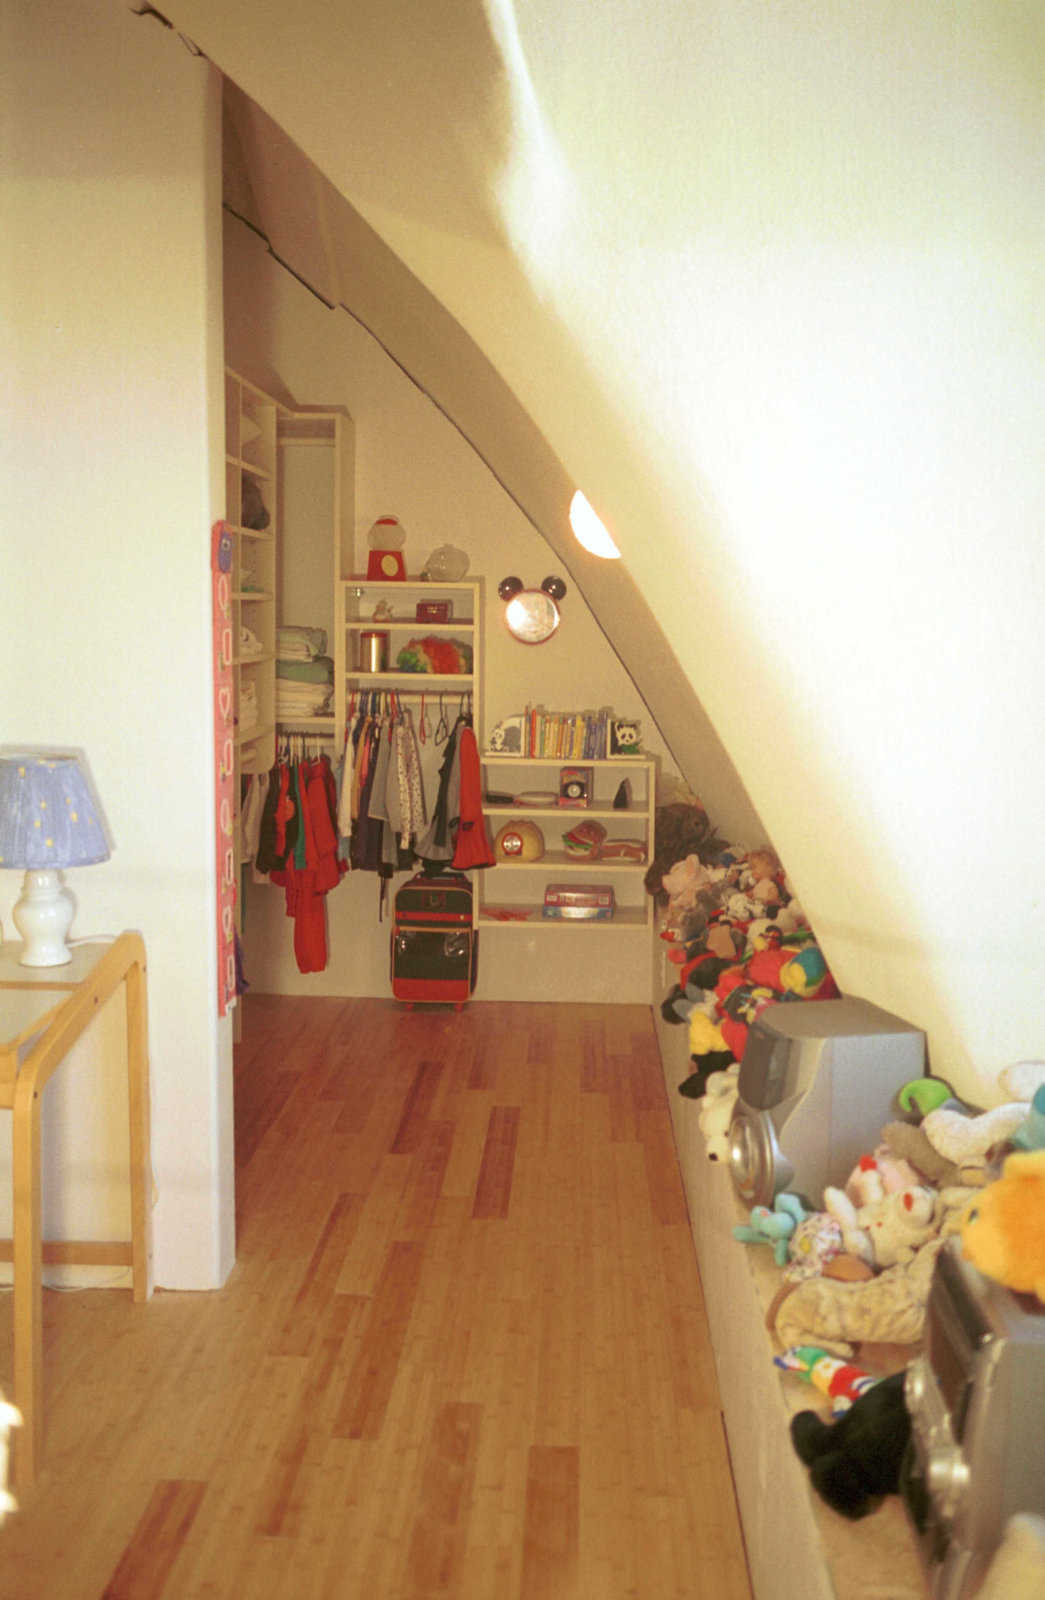 Meili’s stuff — She has ample storage space for clothes, books and toys.